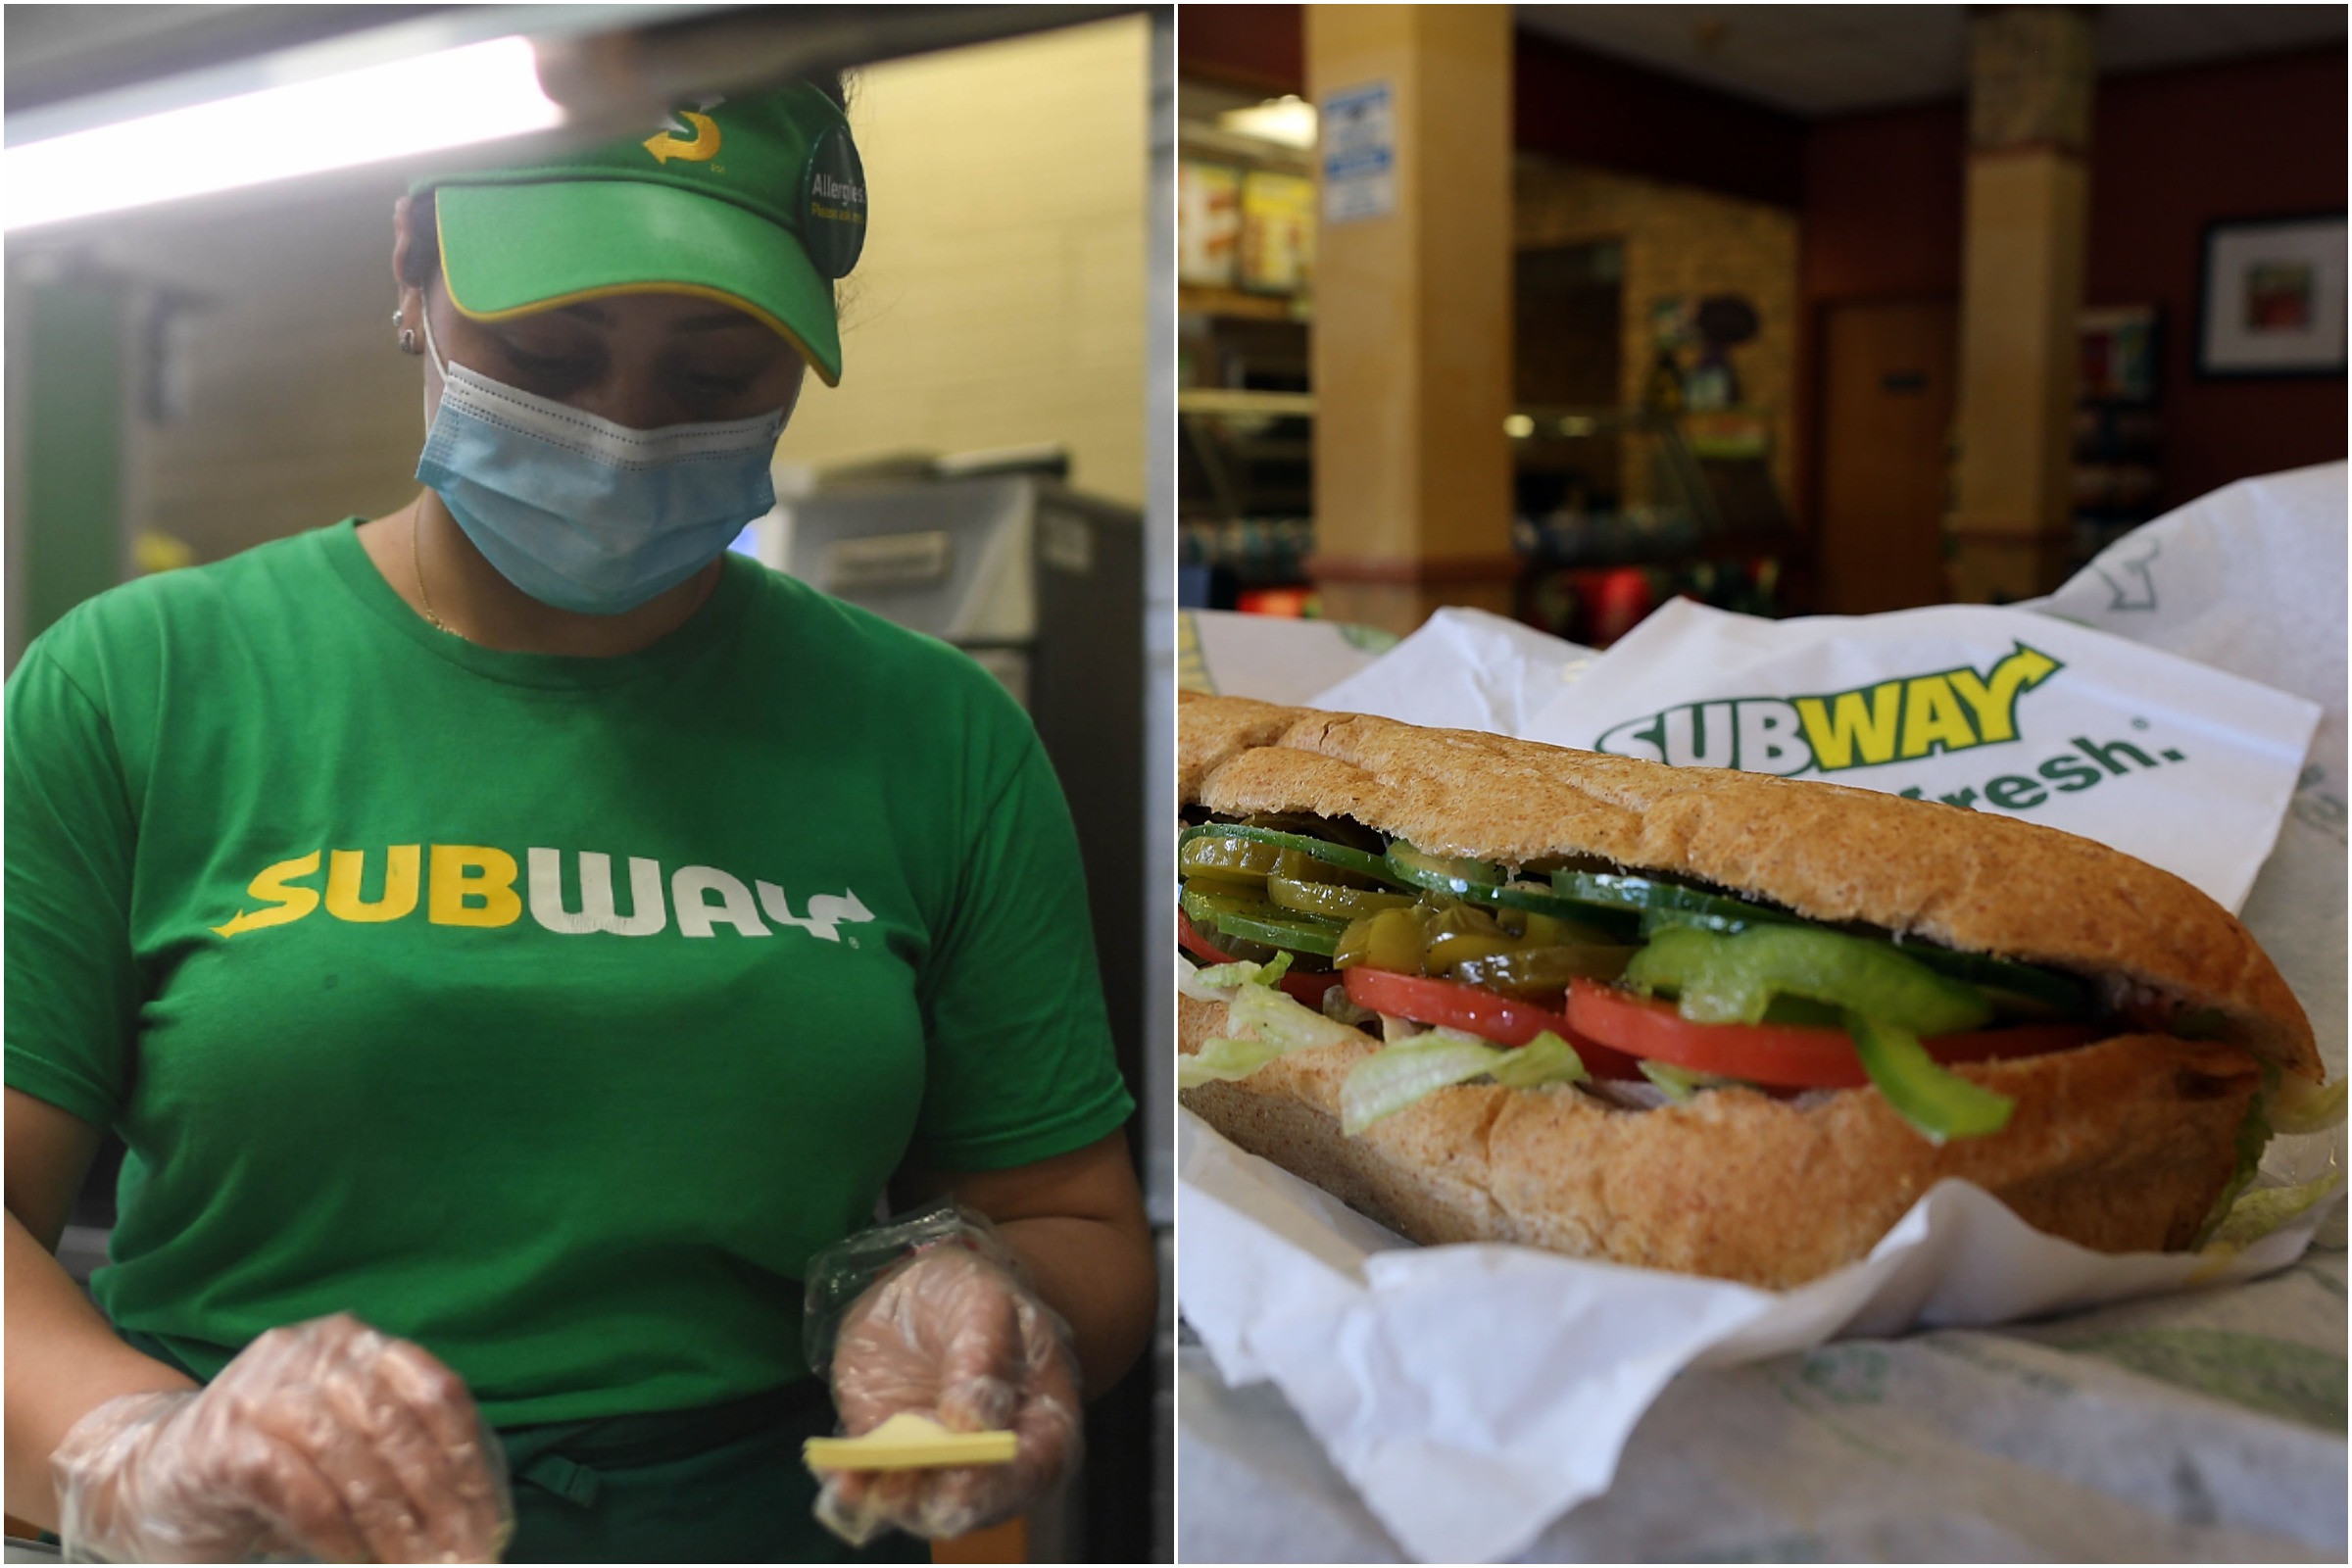 Subway S New Sandwiches A Safety Hazard Franchise Association Claims